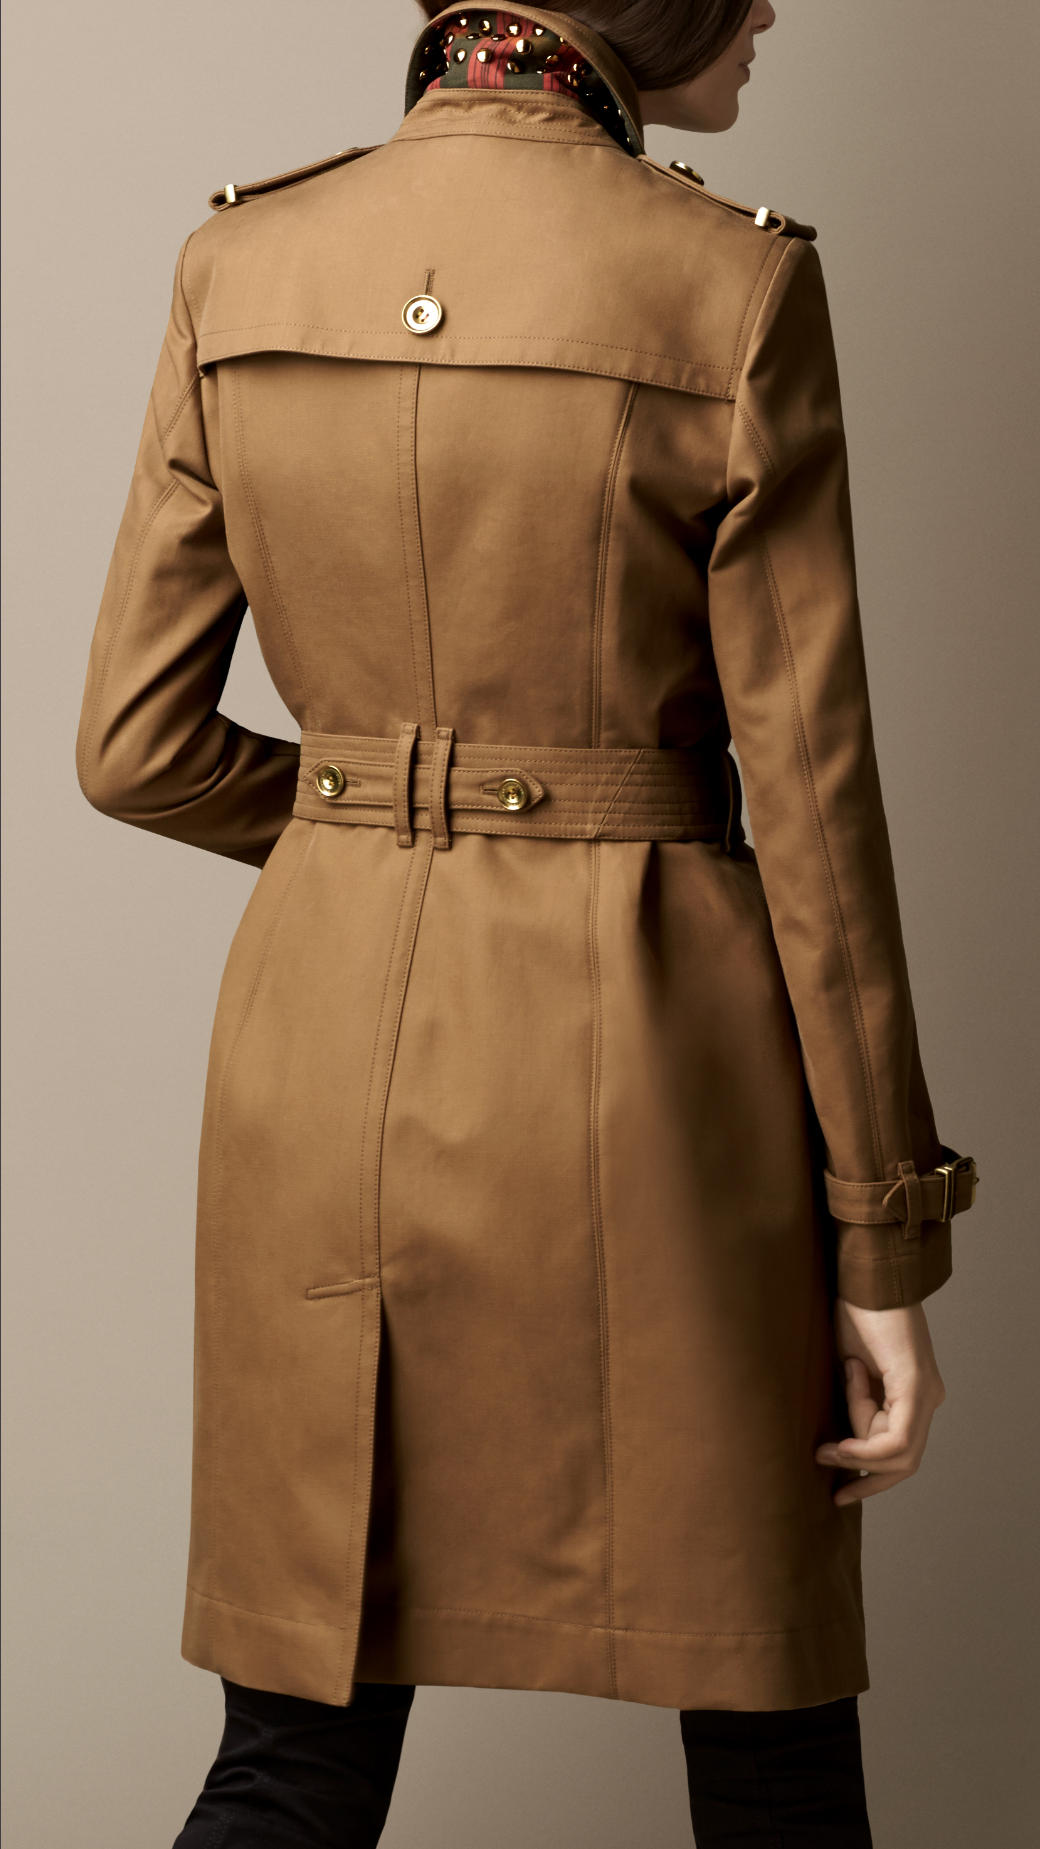 Burberry Long Bonded Cotton Trench Coat with Studded Undercollar in ...